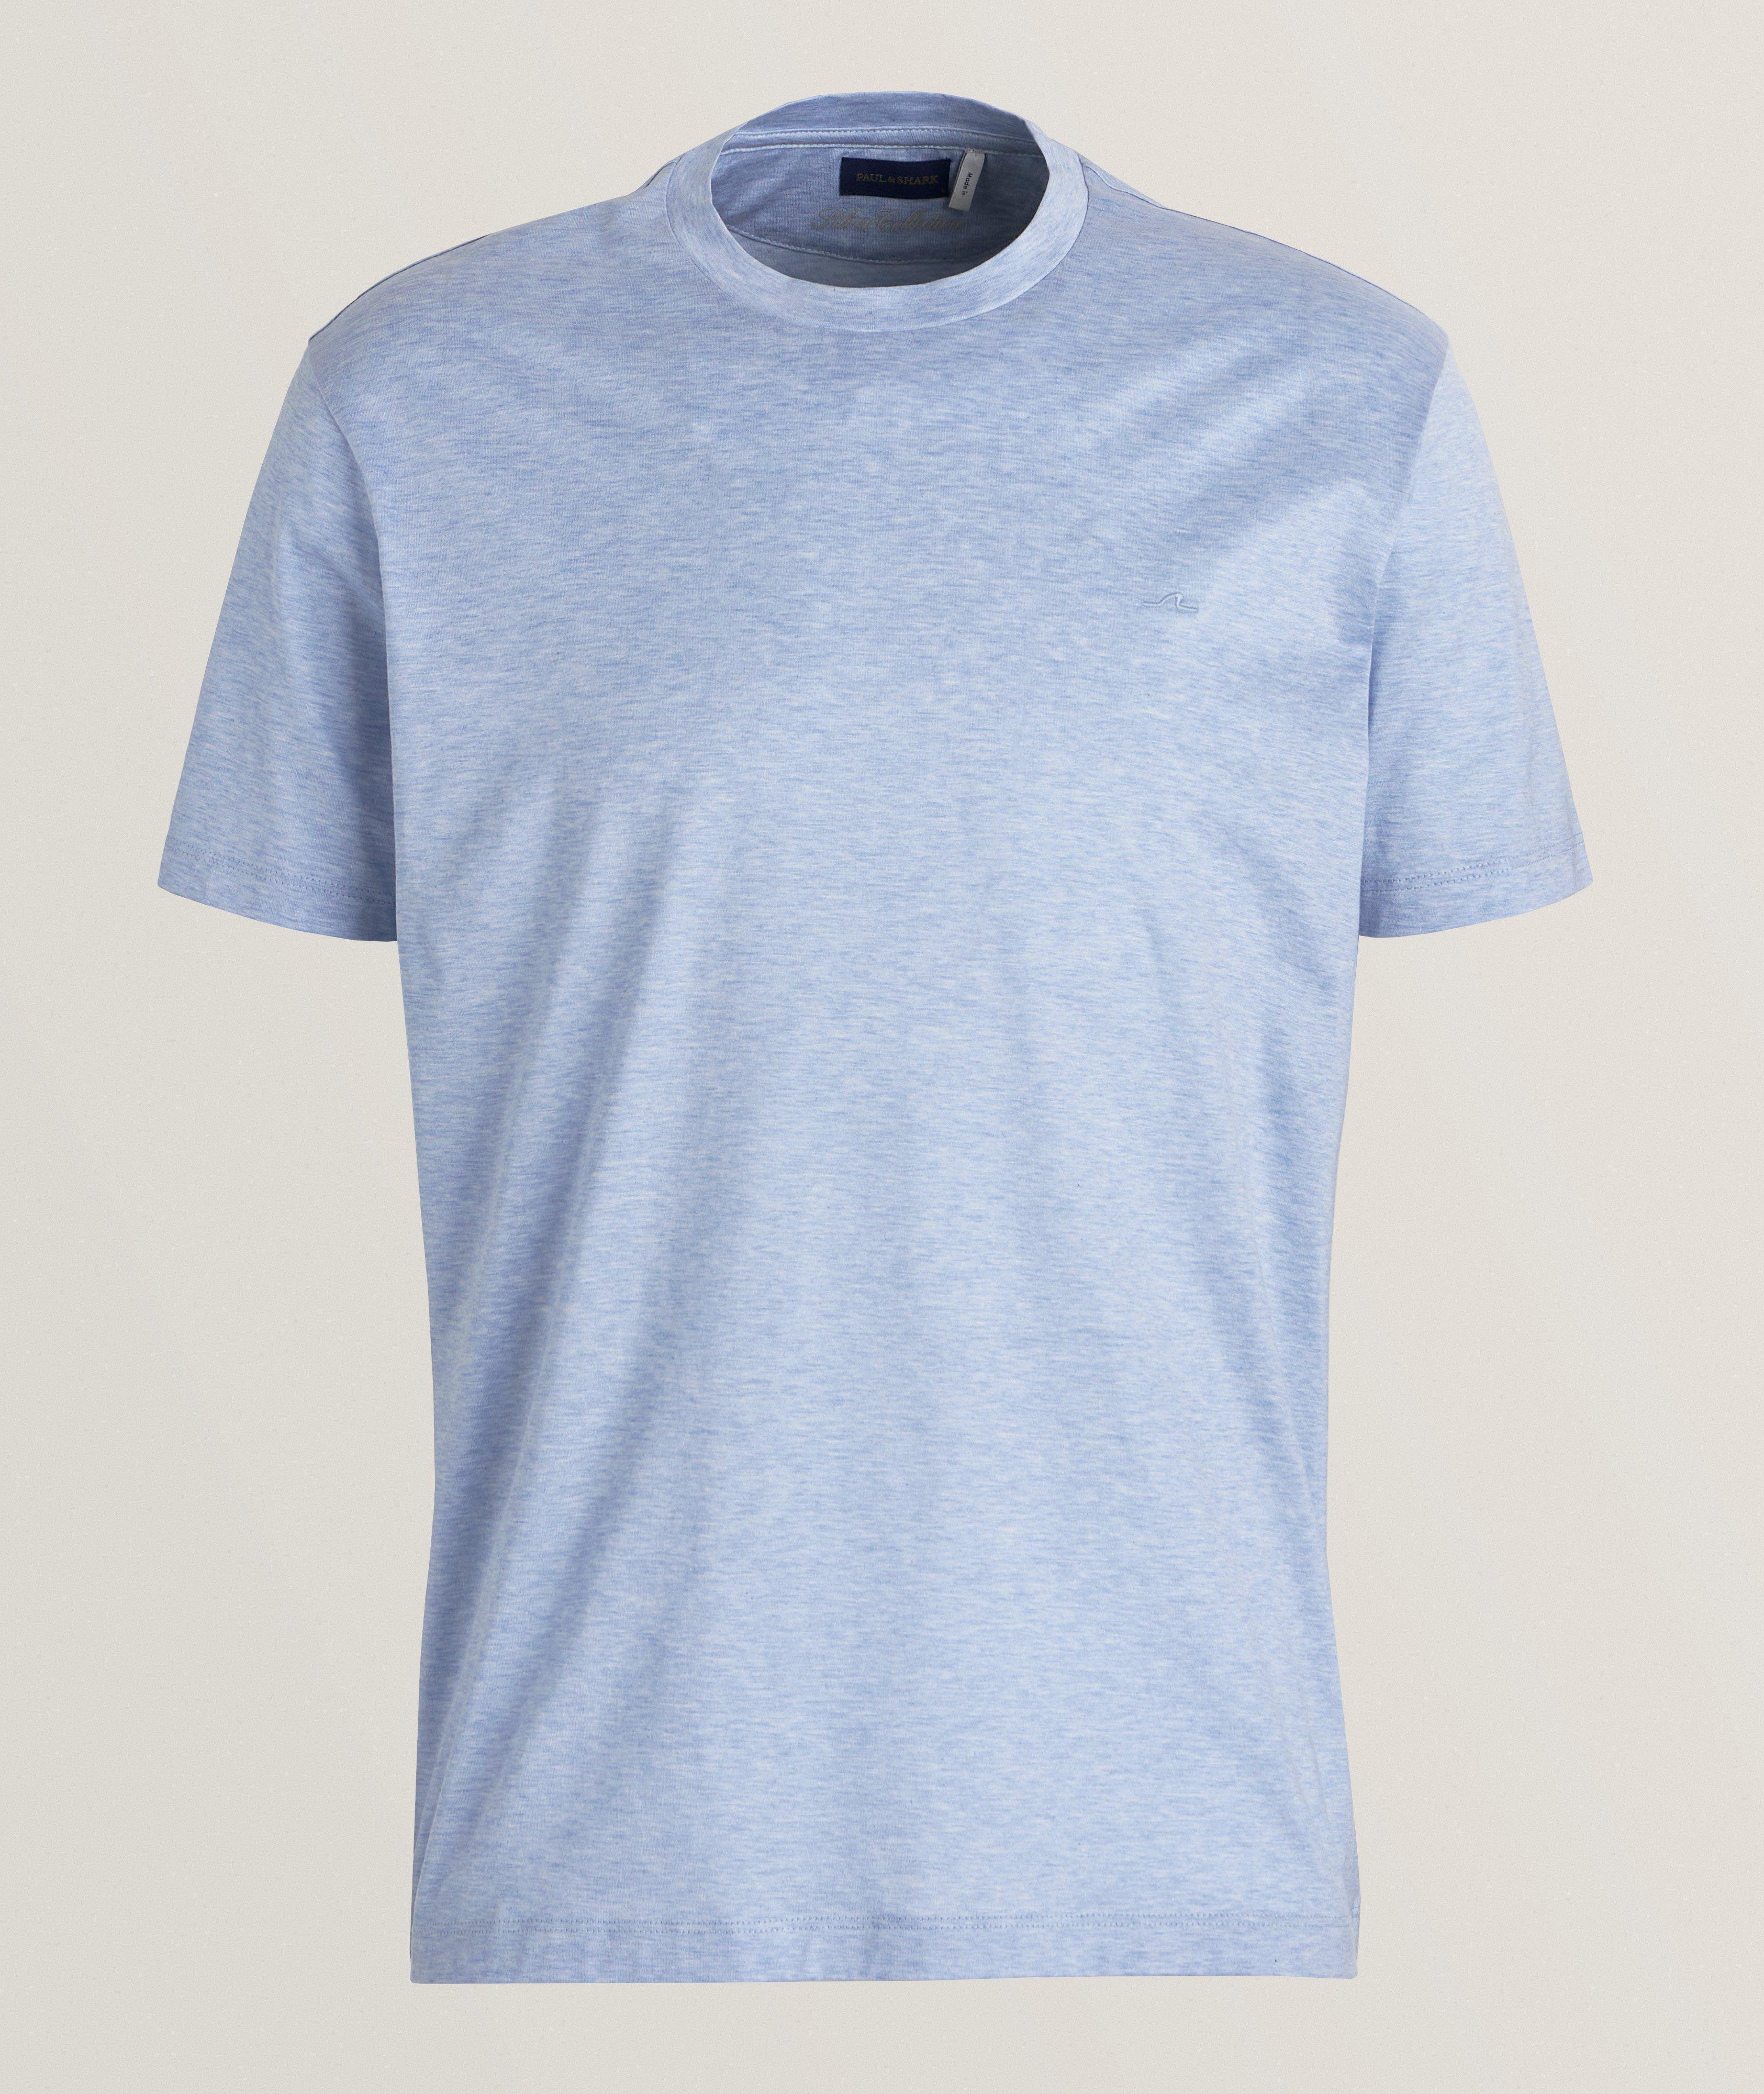 Silver Collection Garment Washed Jersey T-Shirt image 0